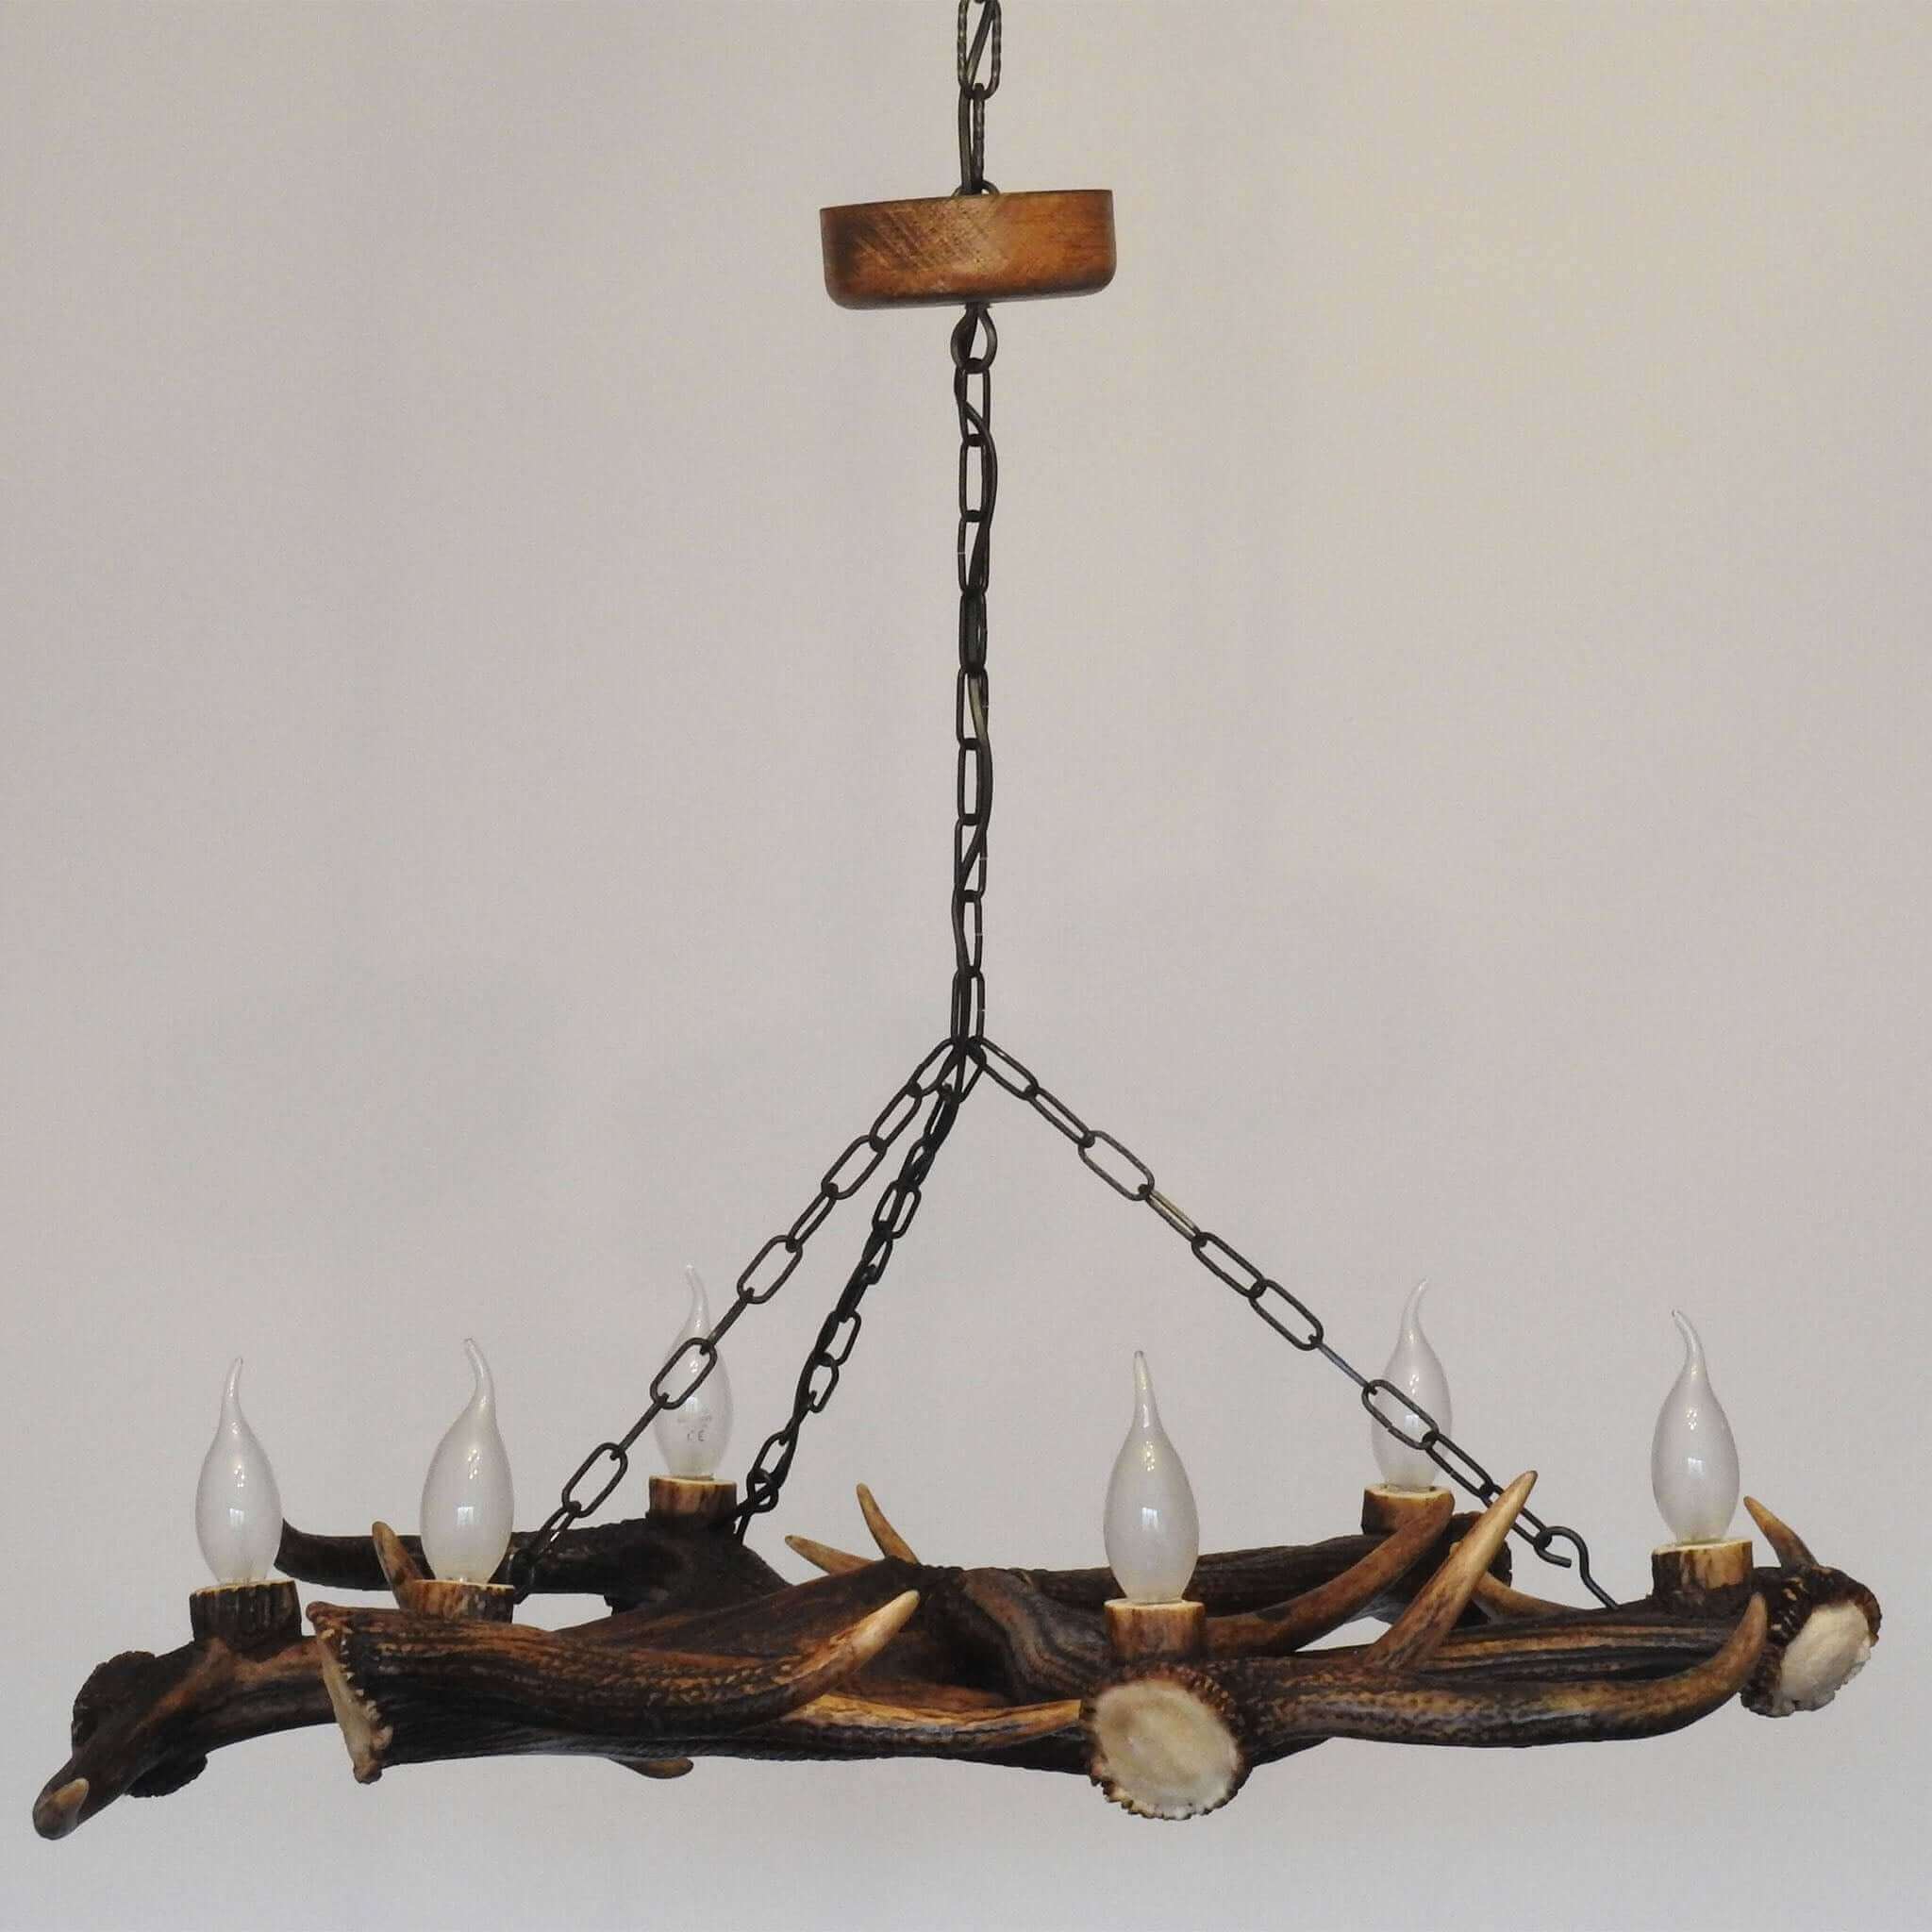 Real antler lamp with 6 arms.